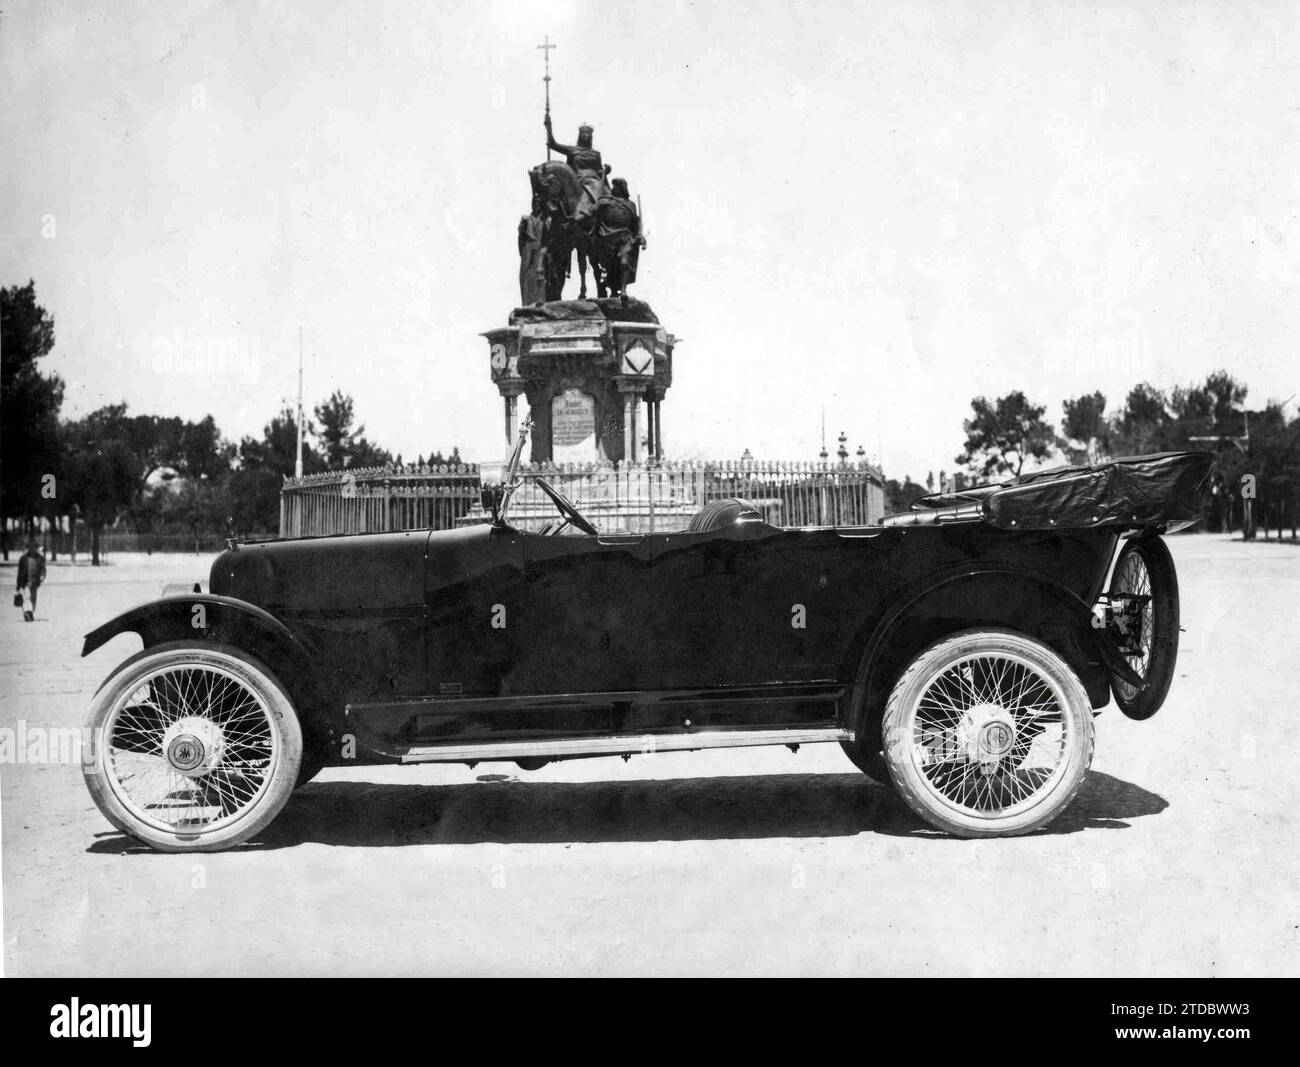 06/30/1918. Sixth Car 'Overland' Acquired by HM the King. Eight Cylinders, without Valves, mounted on 'Goodyear' Tires. Garage Excelsior, Álvarez Baena,7, Madrid. Credit: Album / Archivo ABC / Alfonso Sánchez García Alfonso Stock Photo